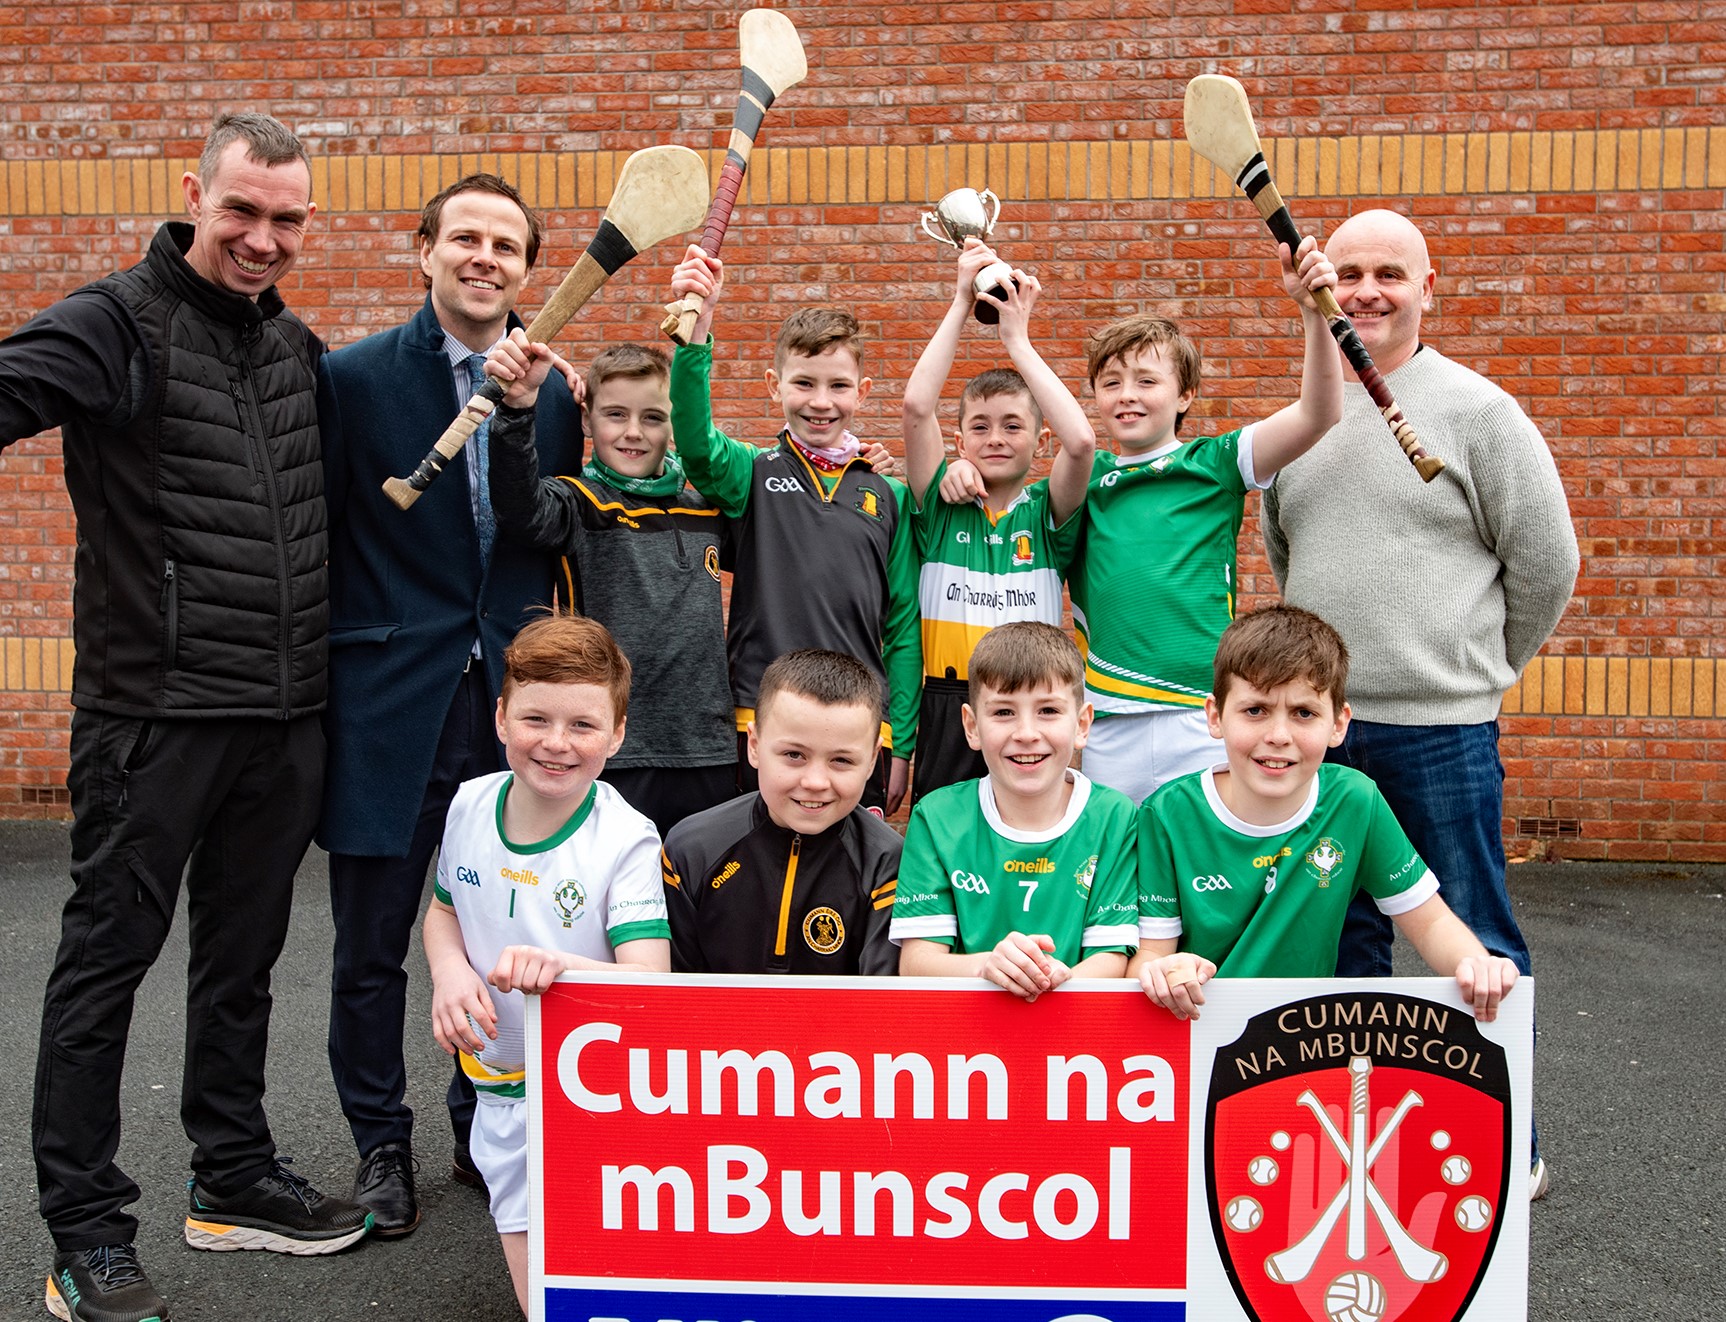 St Colmcilles PS hurlers complete the C na mBunscol double